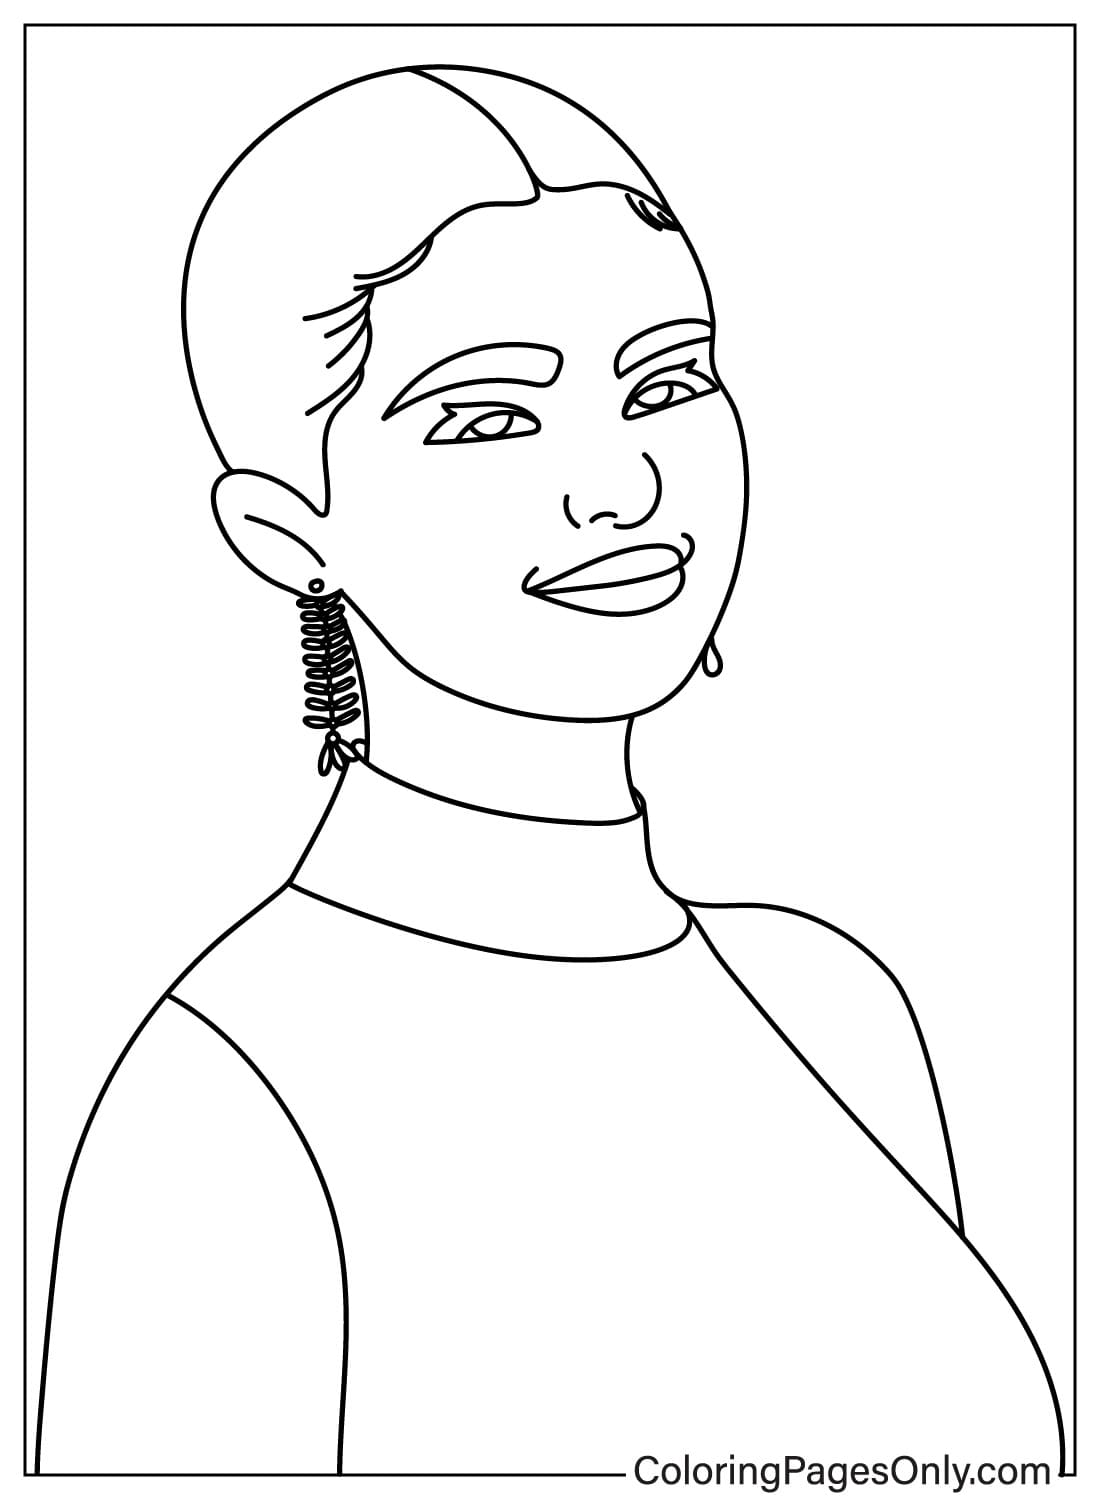 Selena Gomez Coloring Pages to Download from Selena Gomez